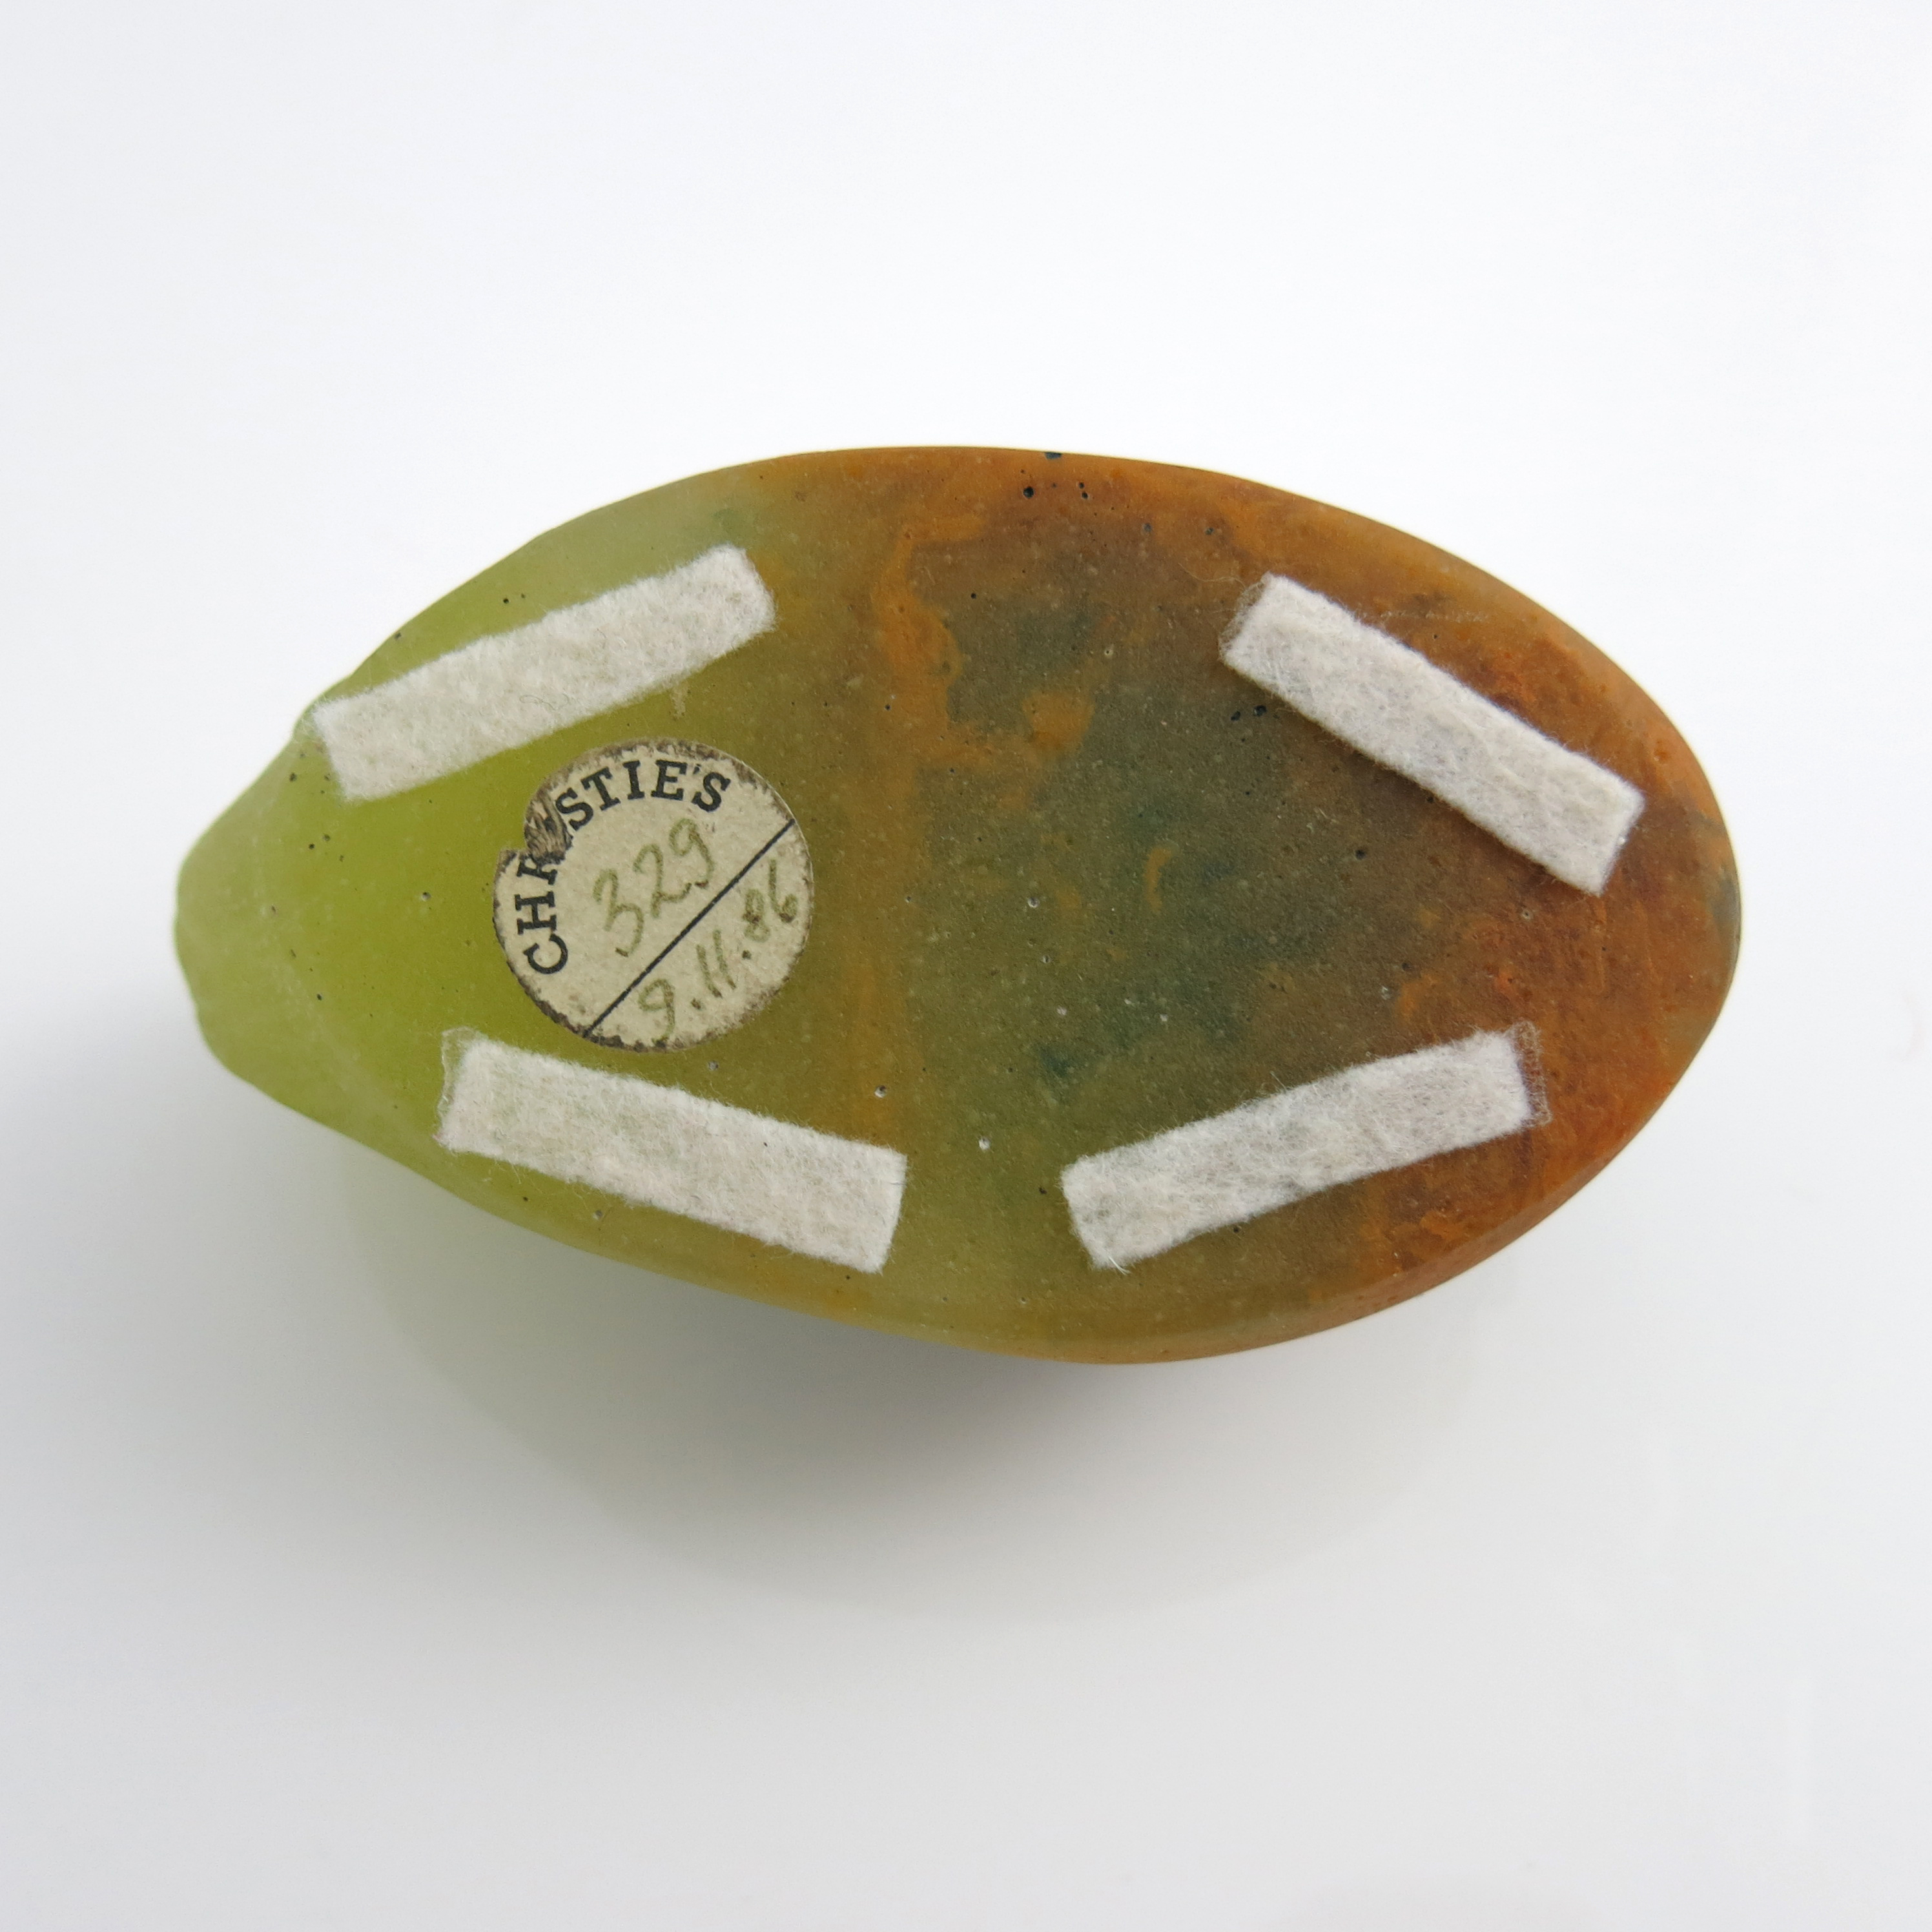 Henri Berge for Amalric Walter, a pate de verre glass paperweight - Image 3 of 4